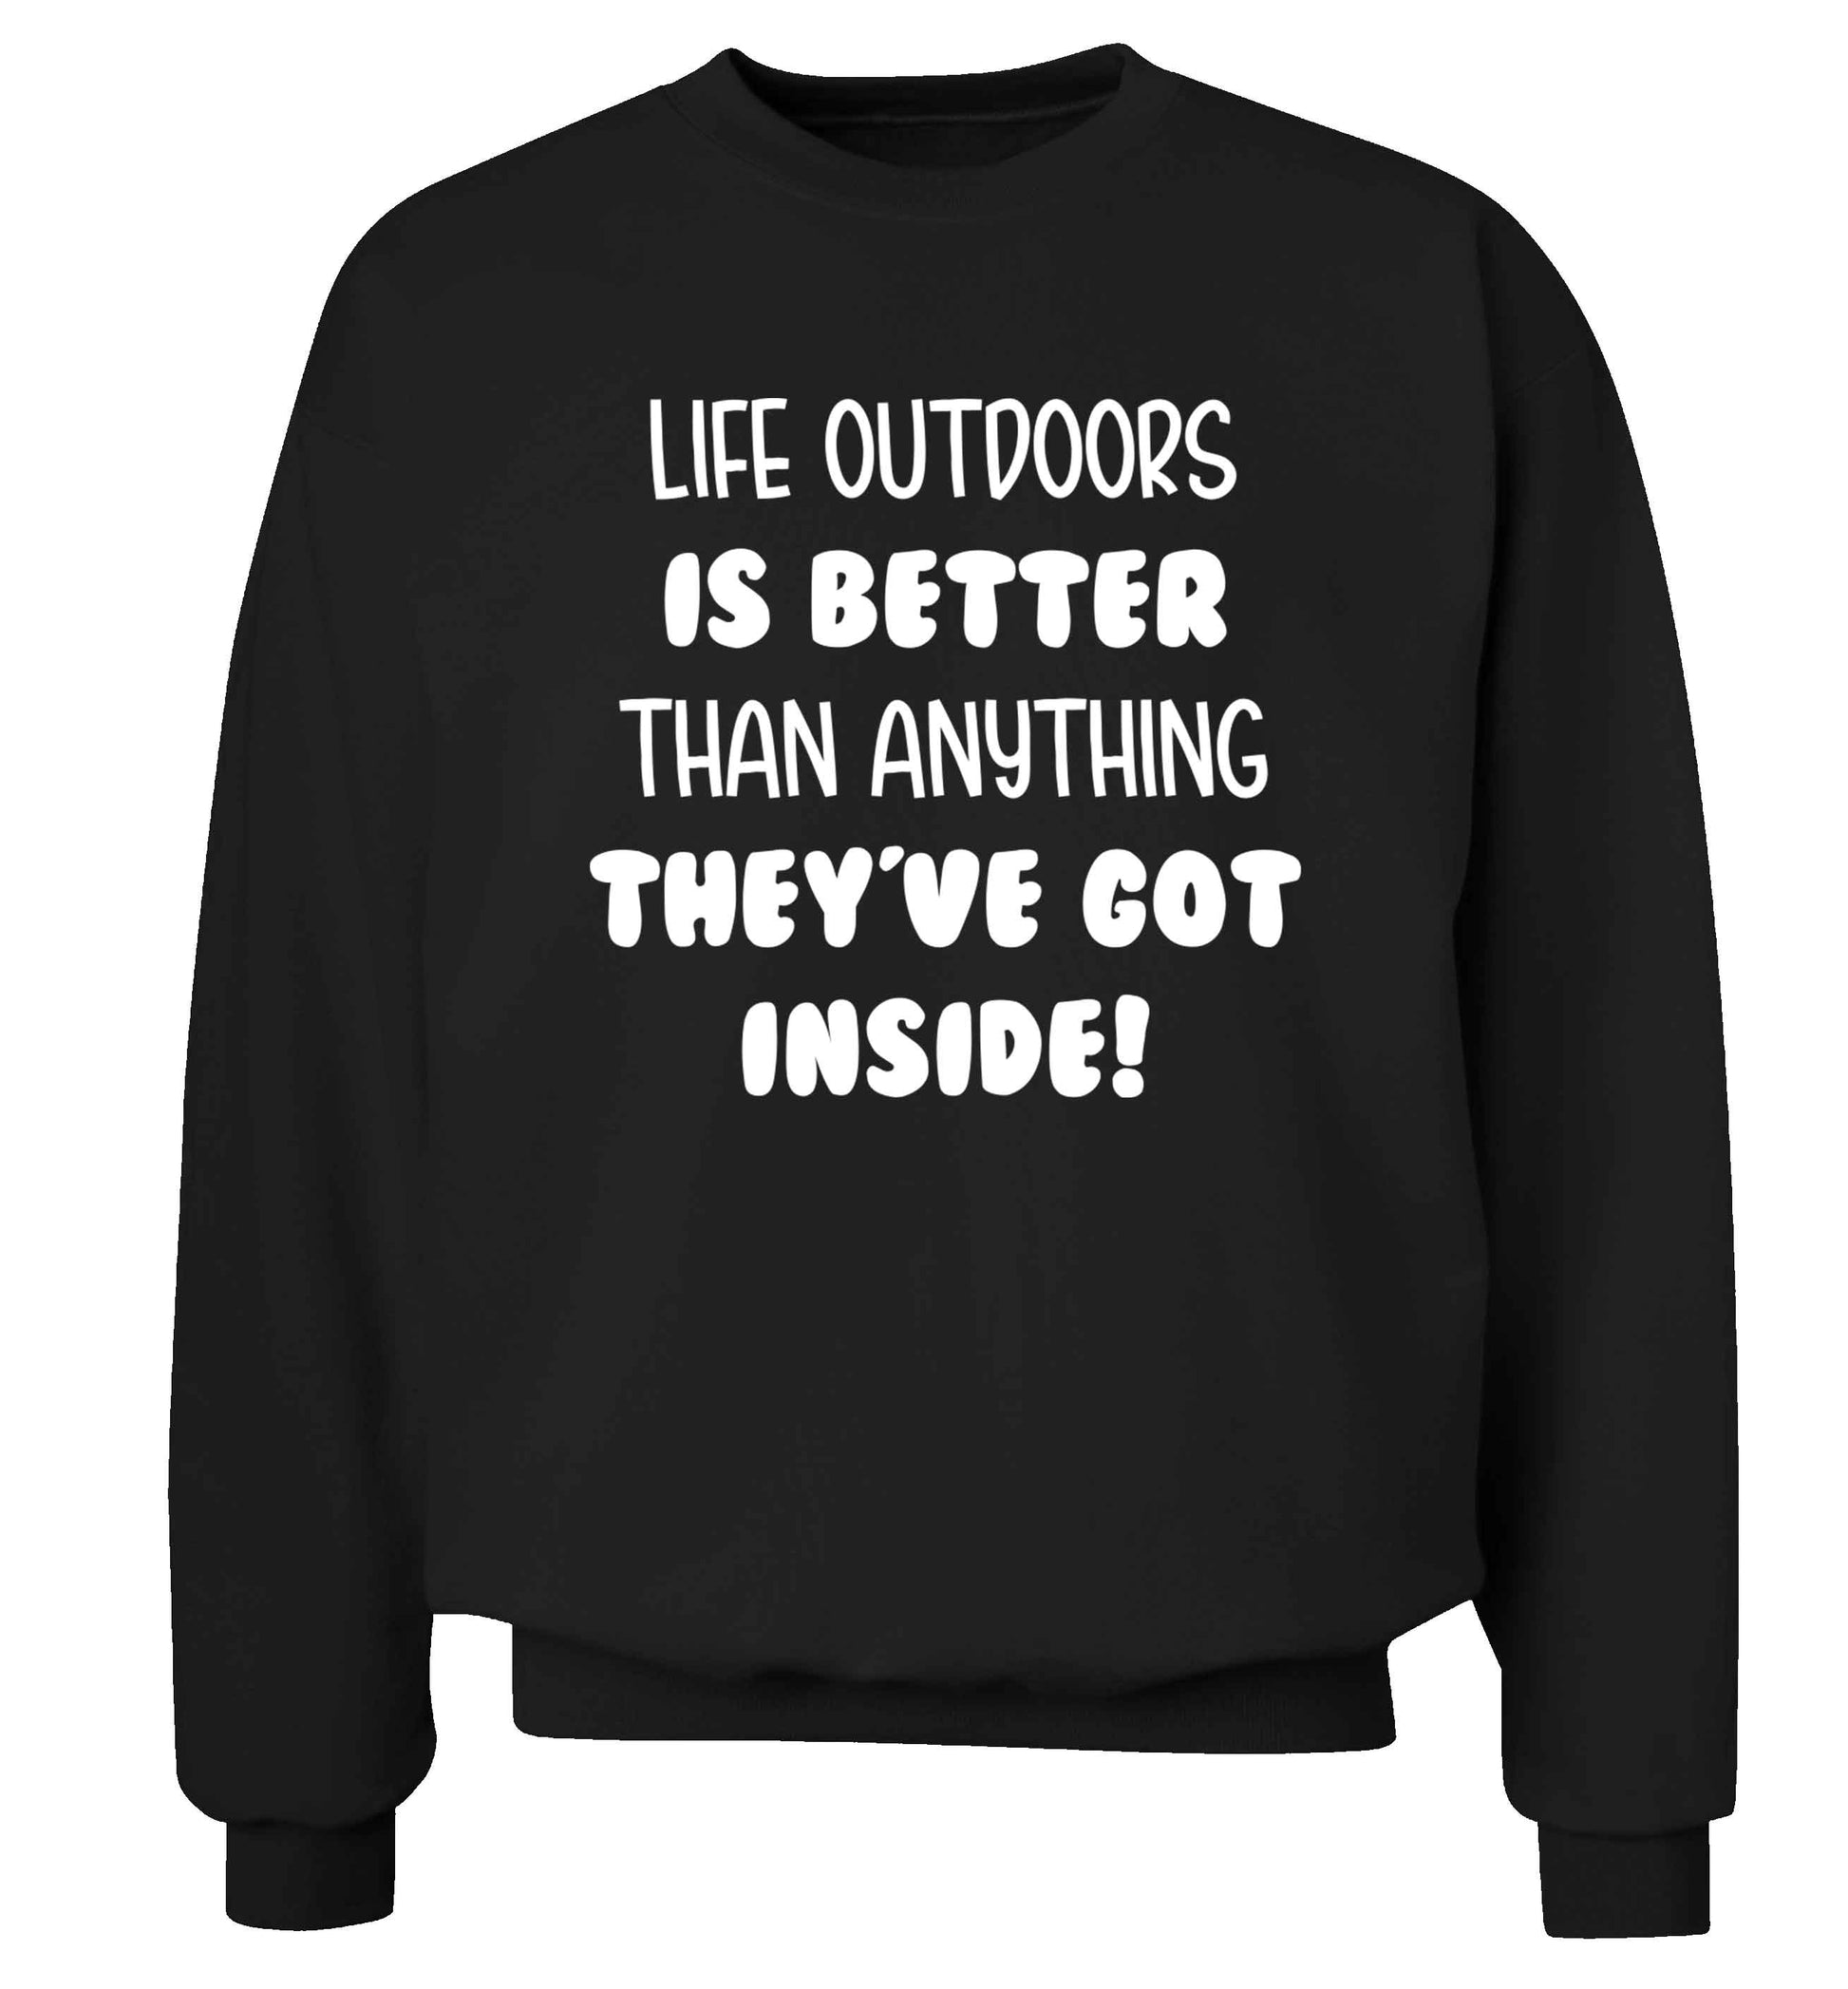 Life outdoors is better than anything they've go inside Adult's unisex black Sweater 2XL